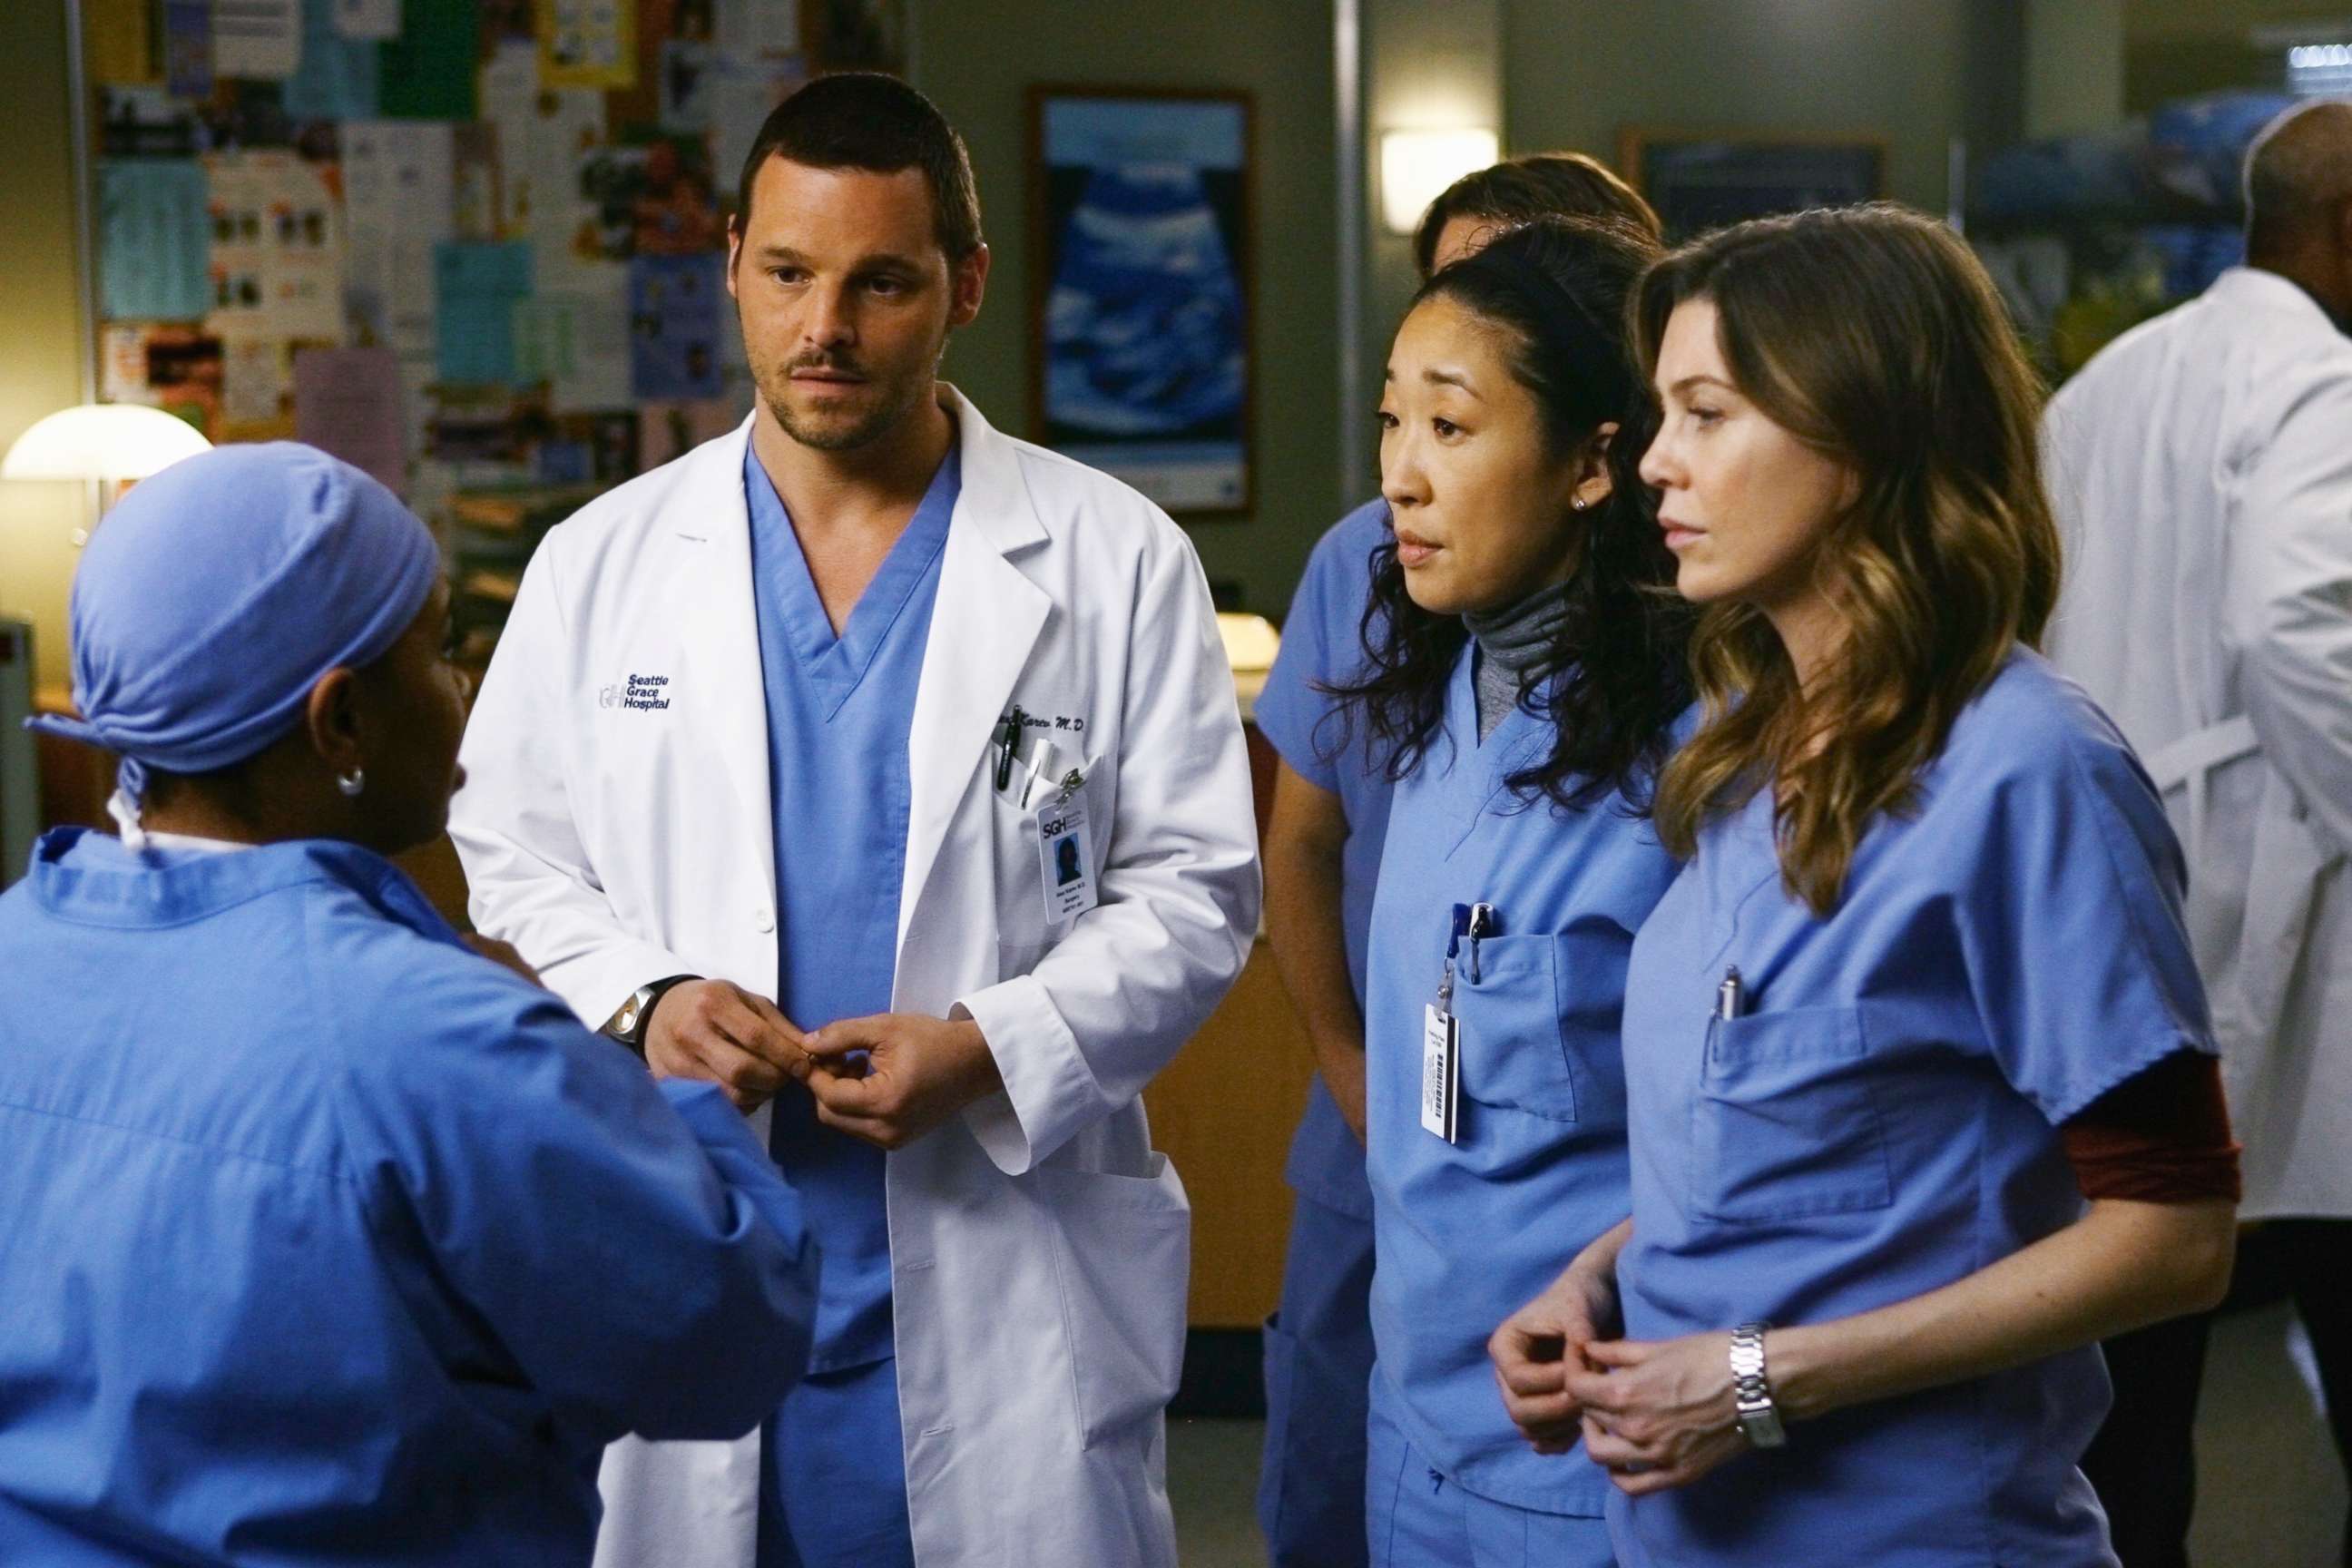 PHOTO: Justin Chambers from "Grey's Anatomy" appears in the episode "Elevator Love Letter" and aired on March 26, 2009, on the ABC Television Network.